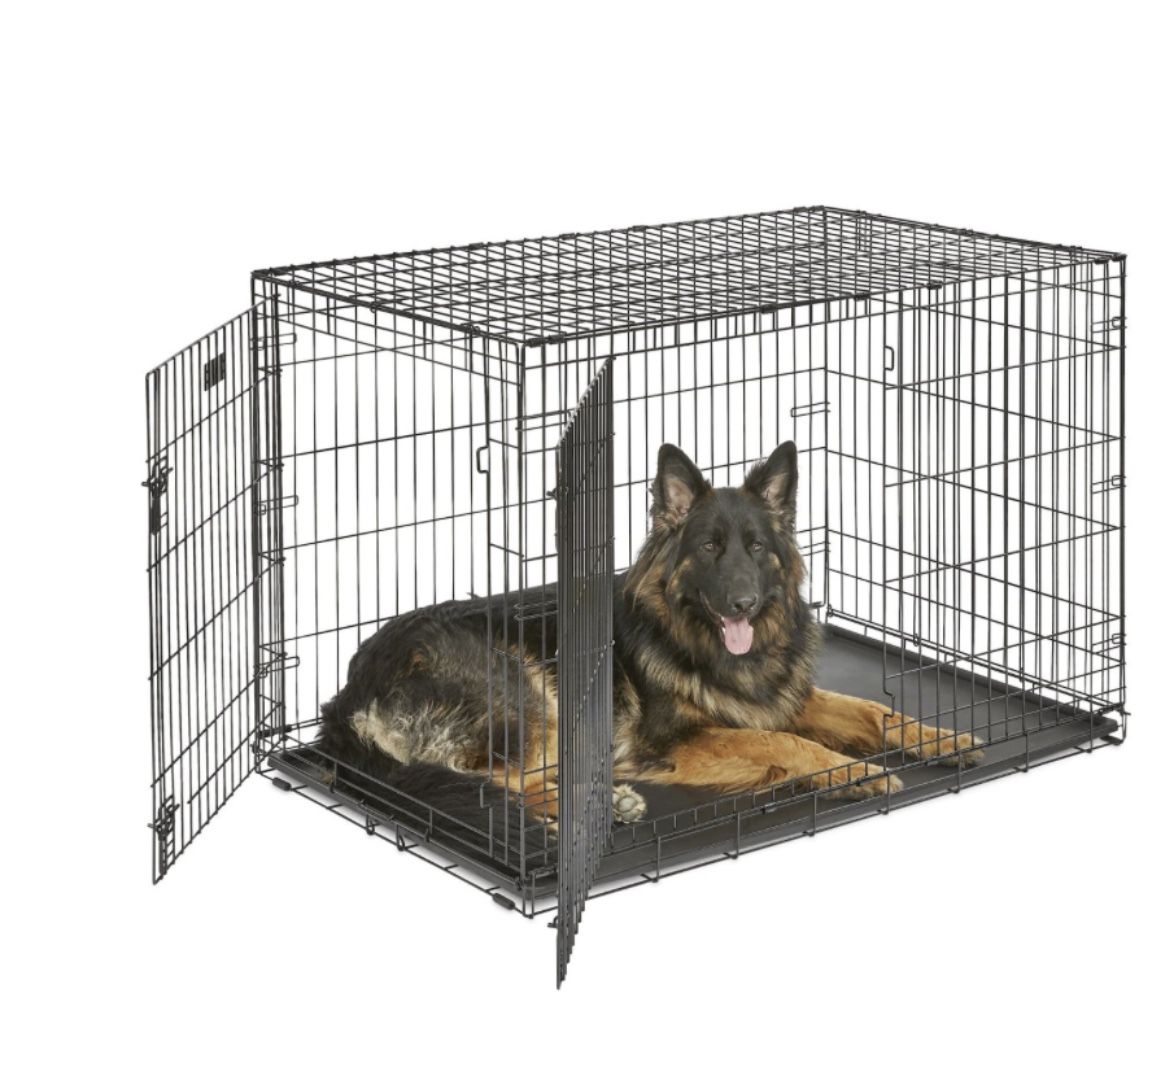 Midwest iCrate Fold & Carry Double Door Collapsible Wire Dig Crate